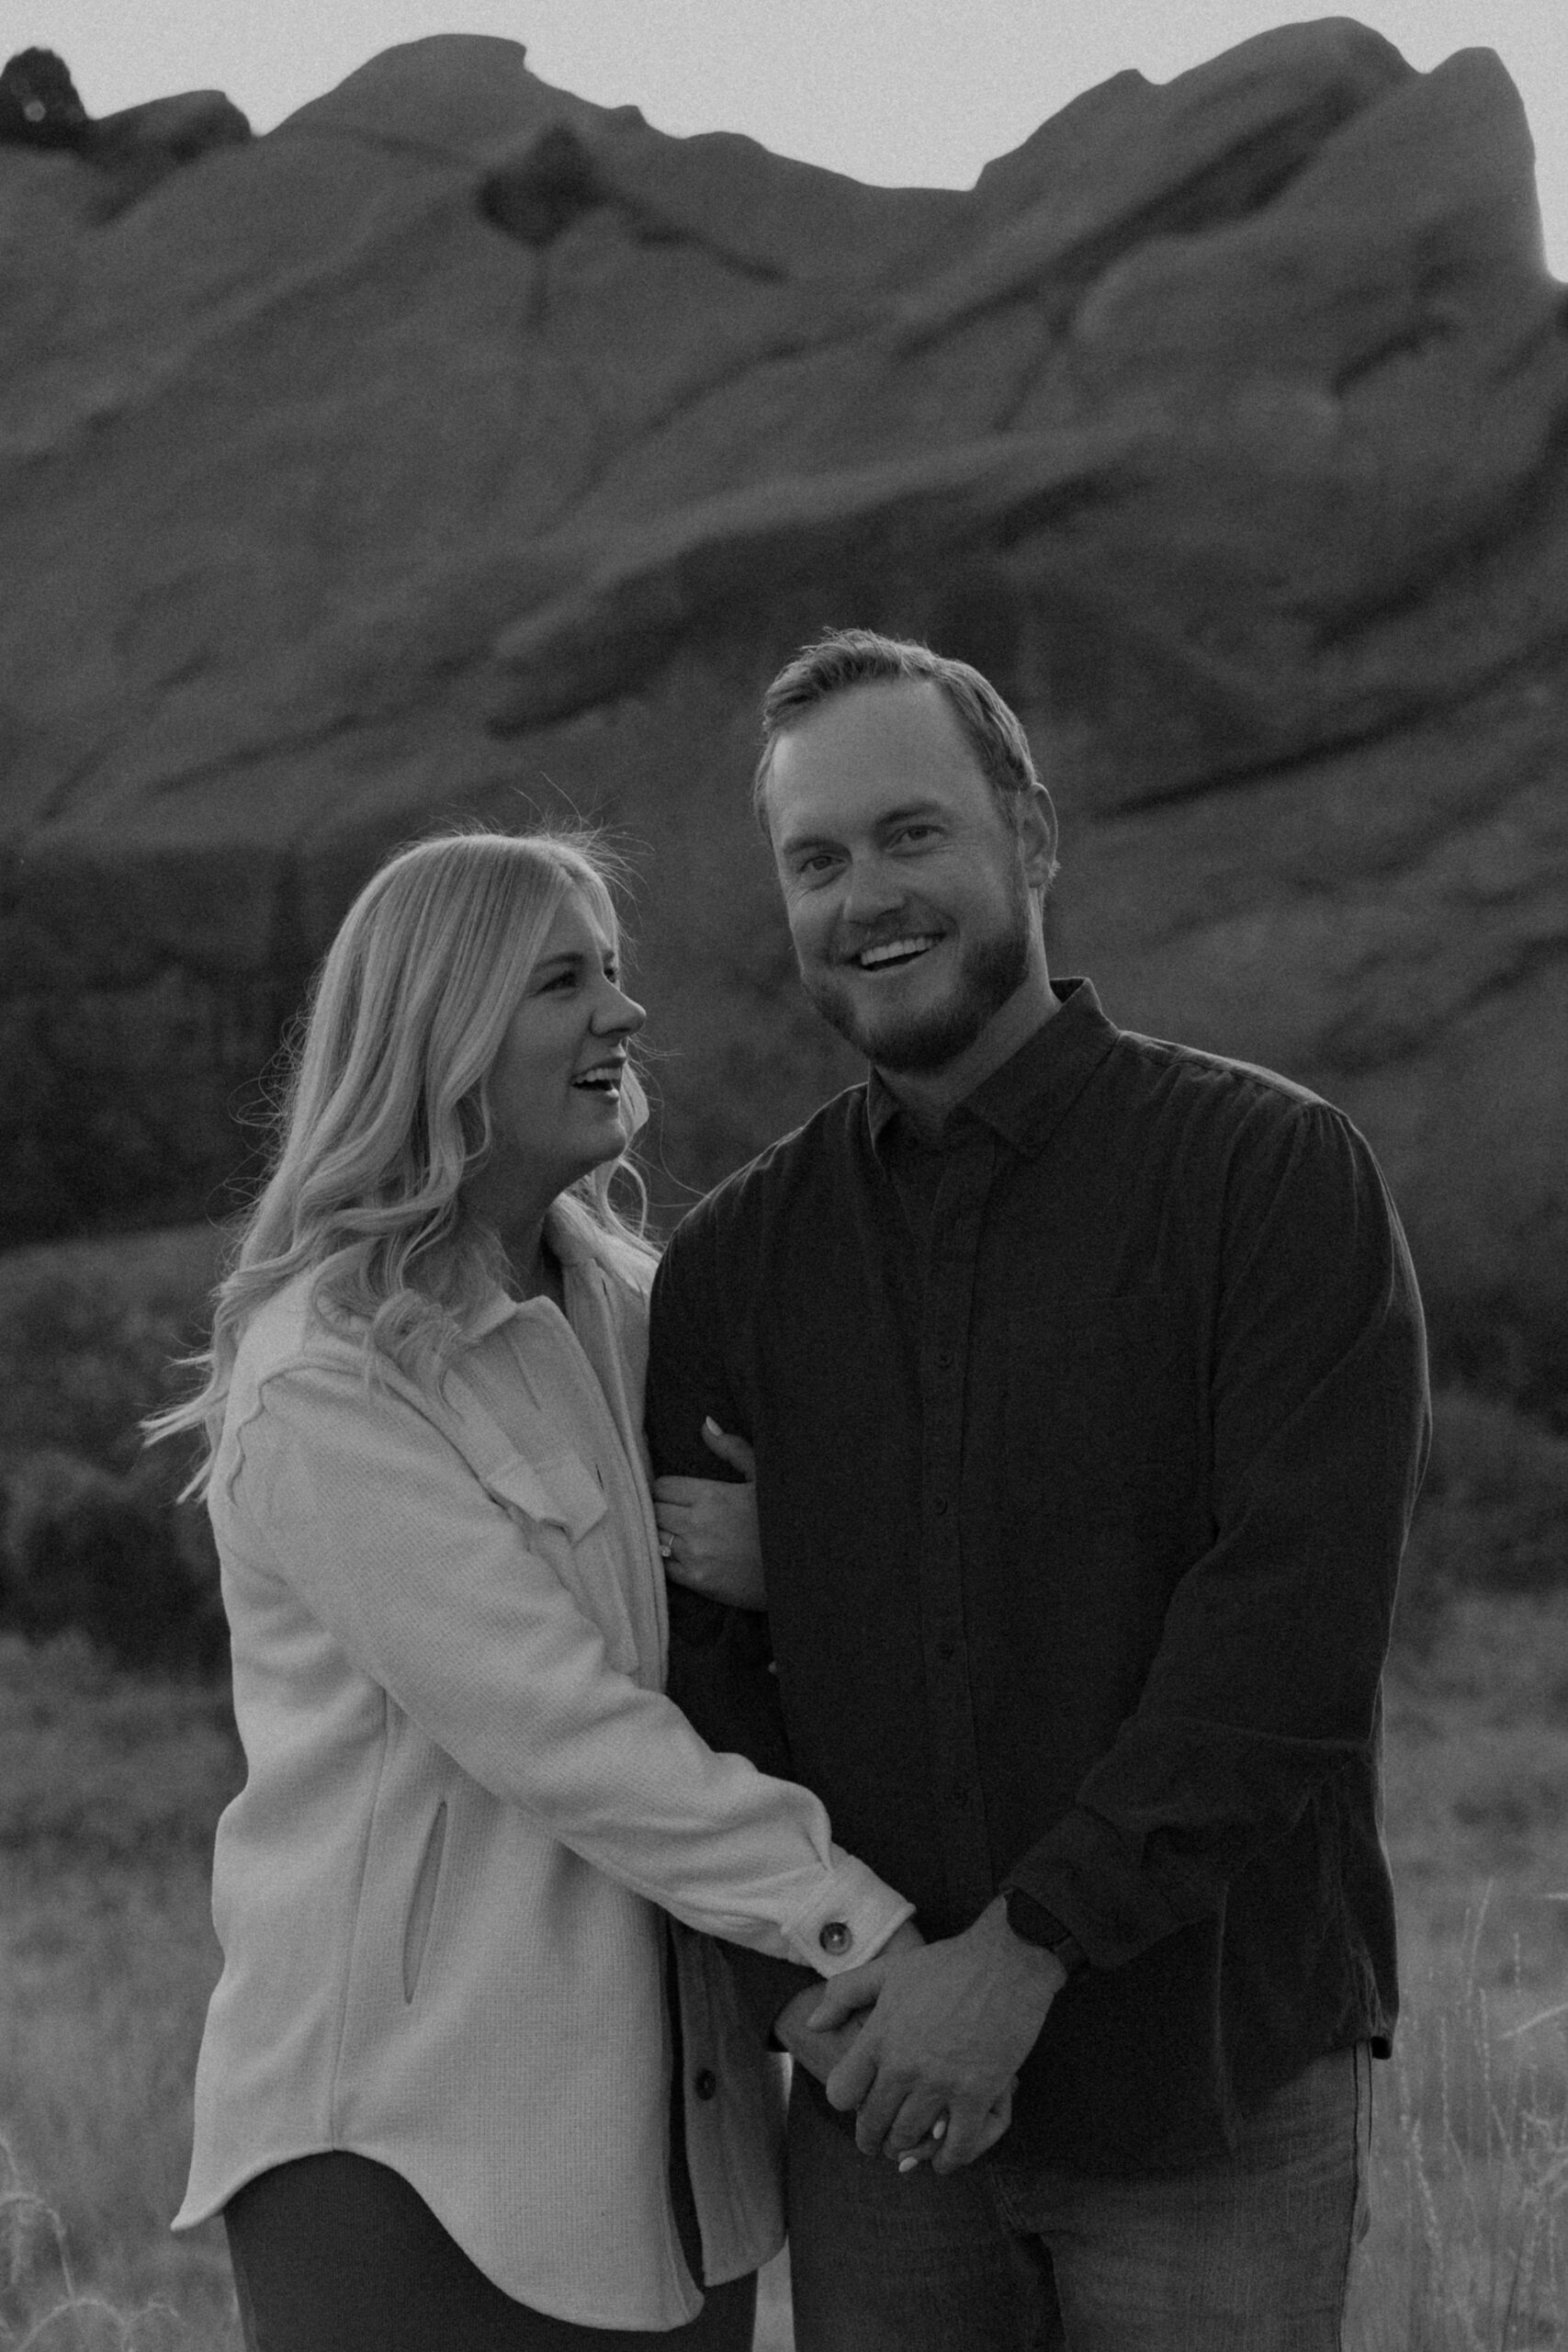 Red Rocks Engagement Photos